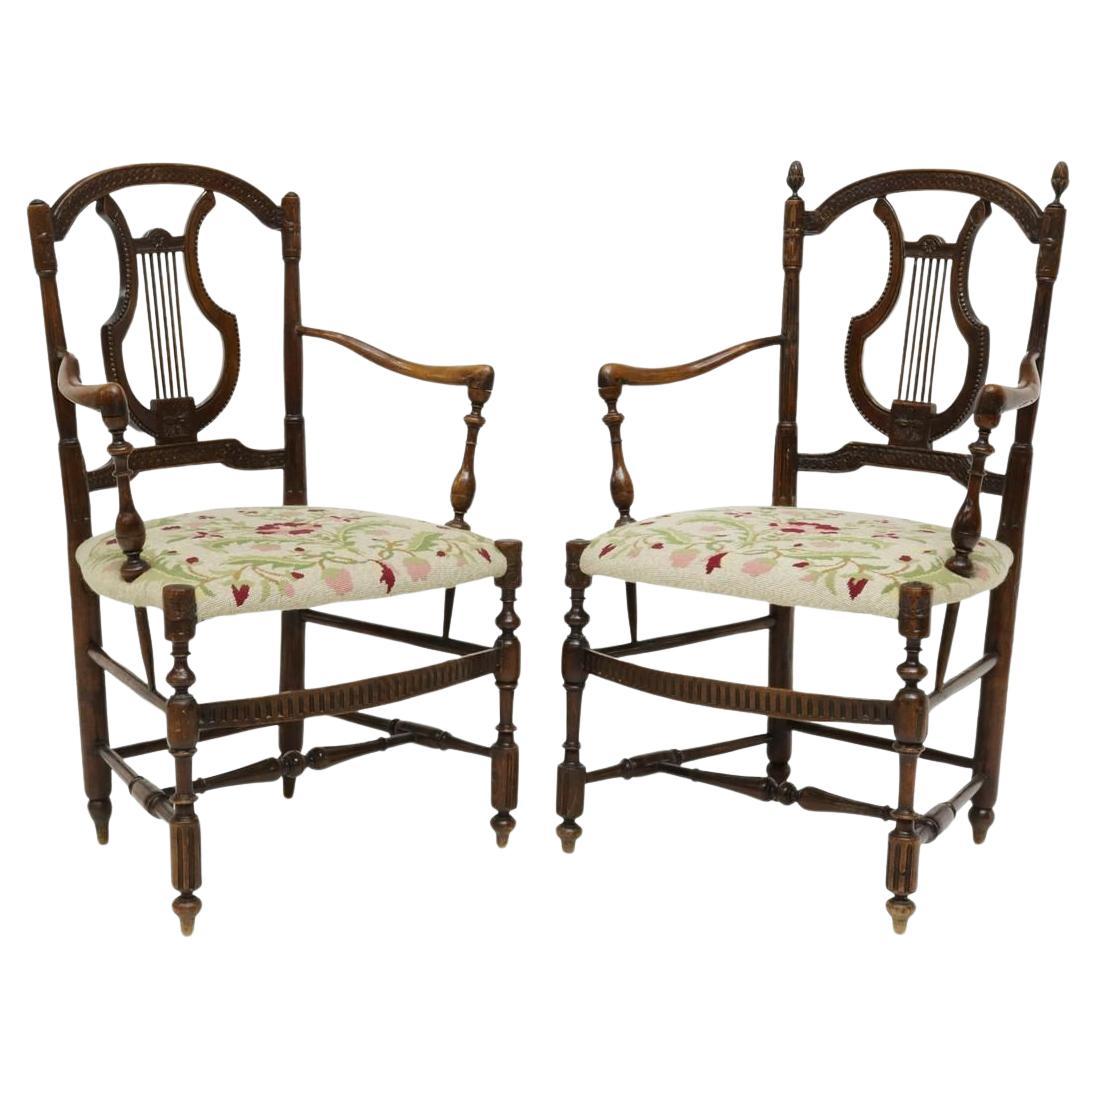 French Carved Oak Lyre-Back Fauteuils Needlepoint Seat Armchairs, A Pair For Sale